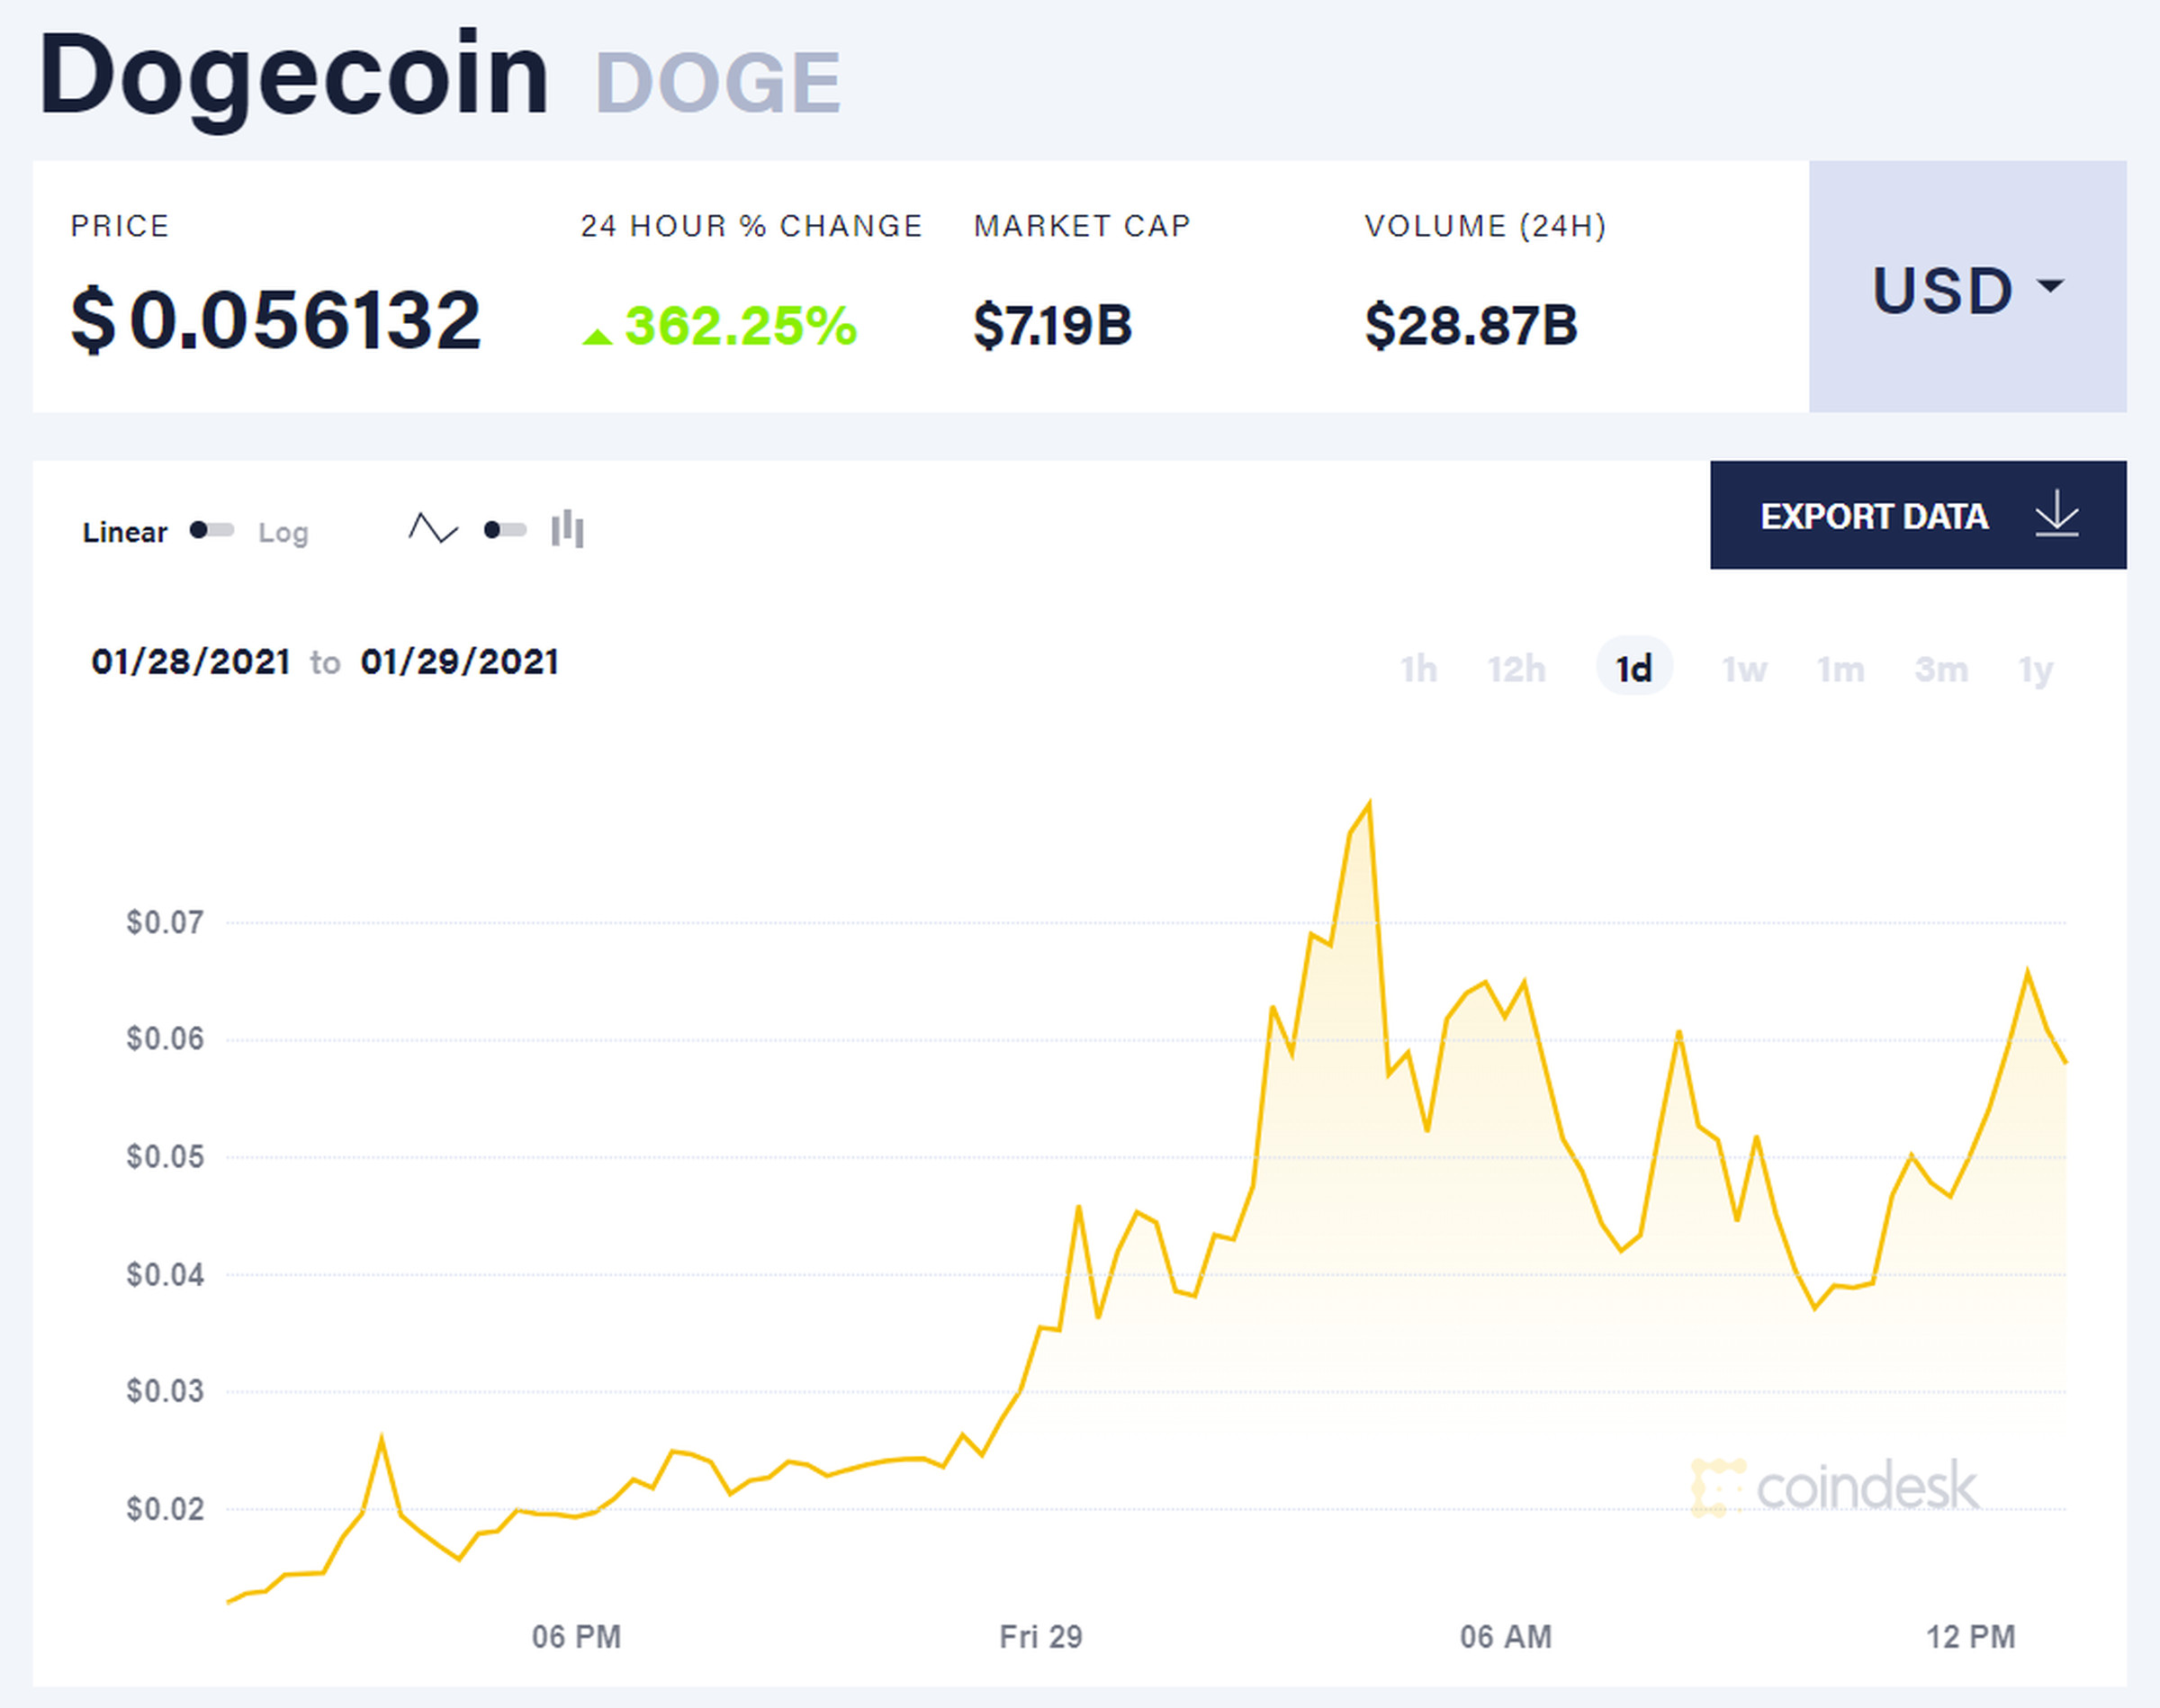 Dogecoin price on Friday morning.